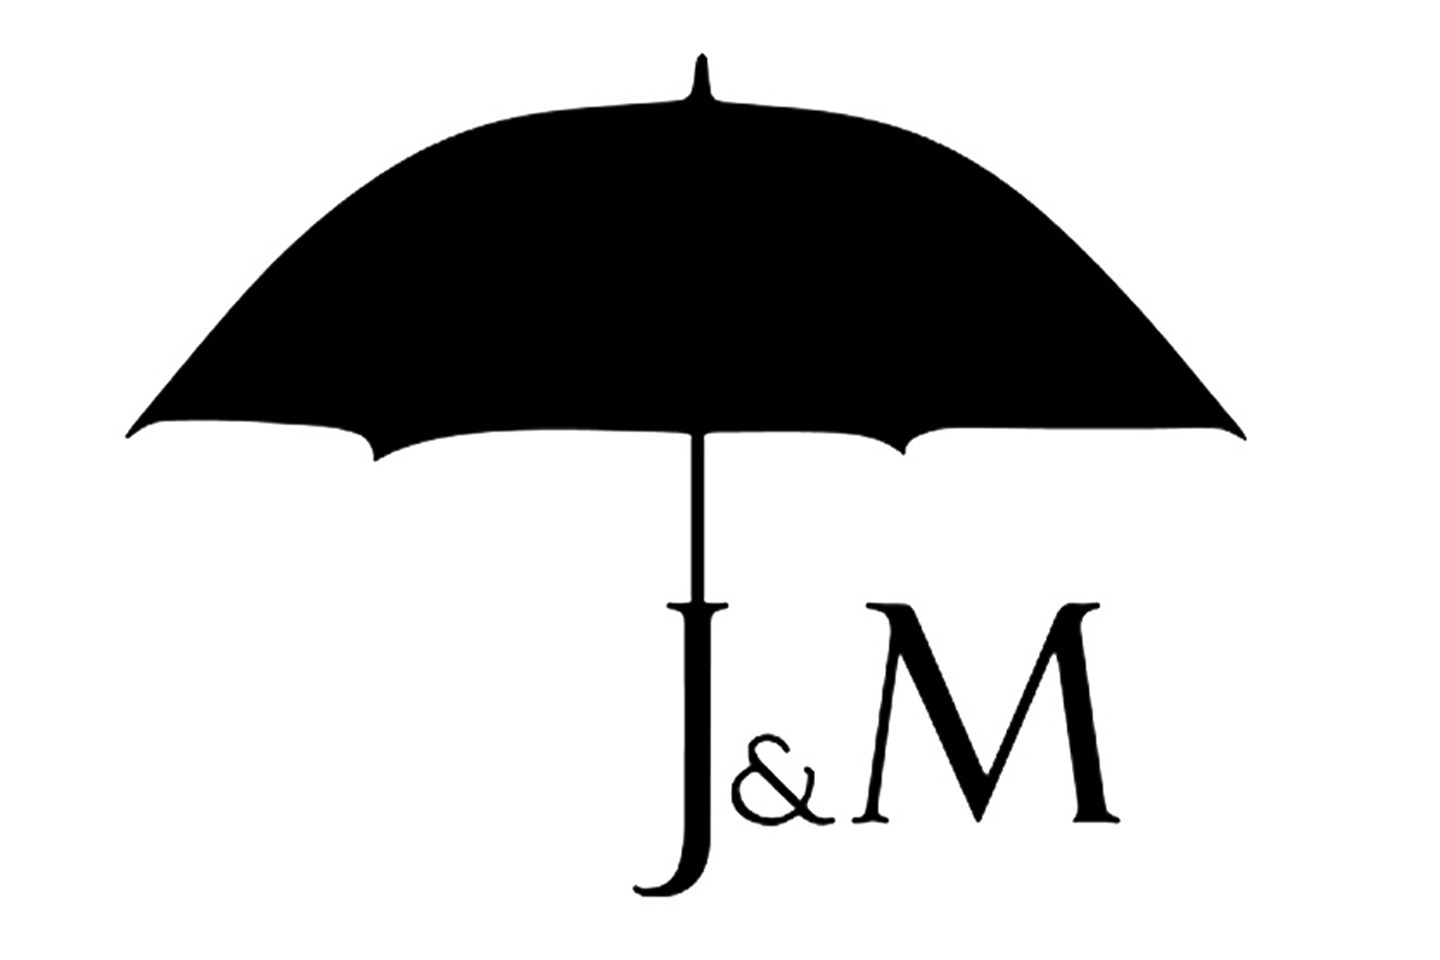 J & M Roofing